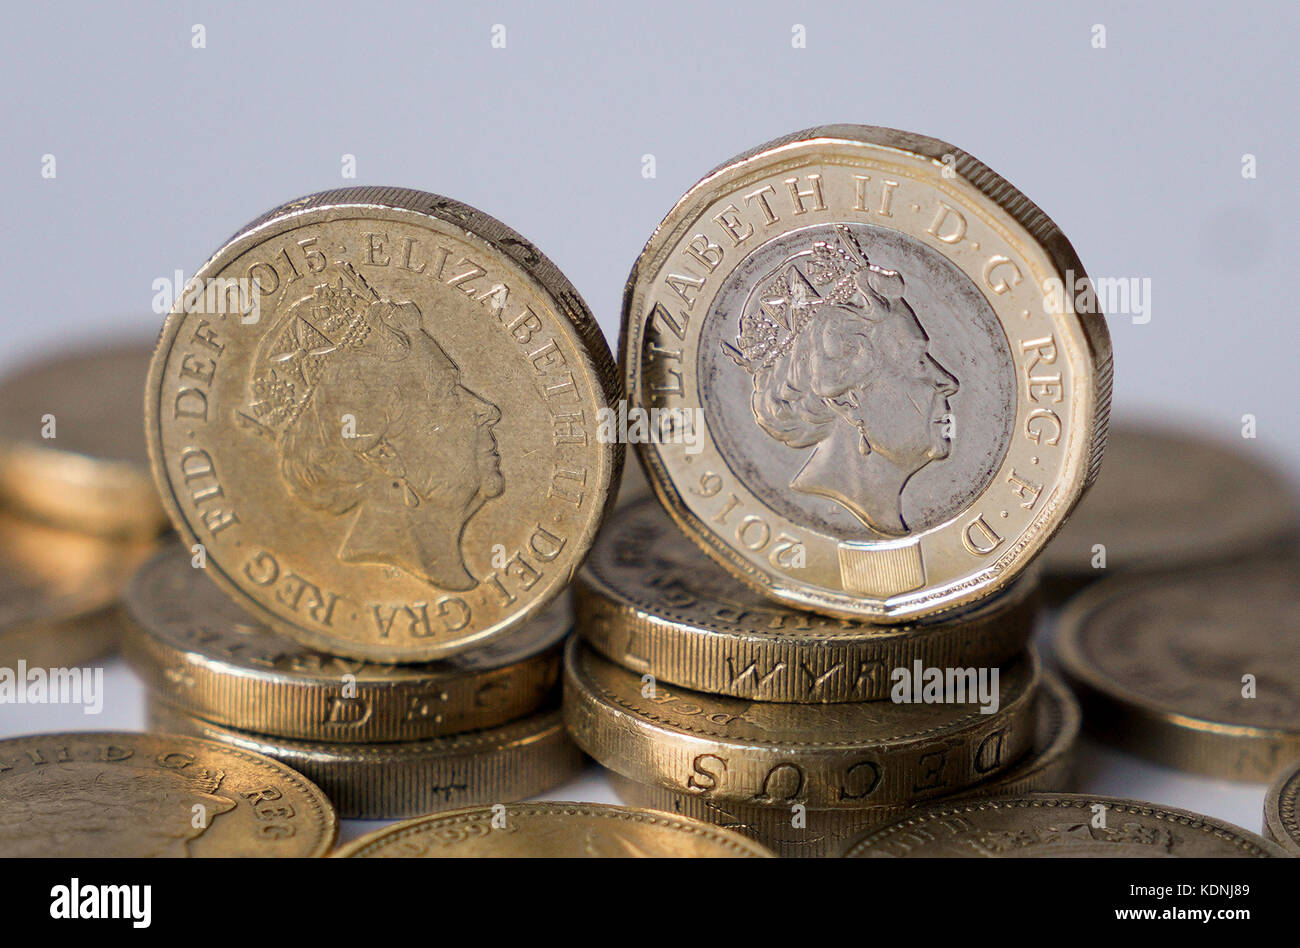 Examples of the old £1 coin (left) and the new one replacing it, as from midnight on Sunday the round pound will no longer be legal tender and businesses are no longer obliged to accept them. Stock Photo